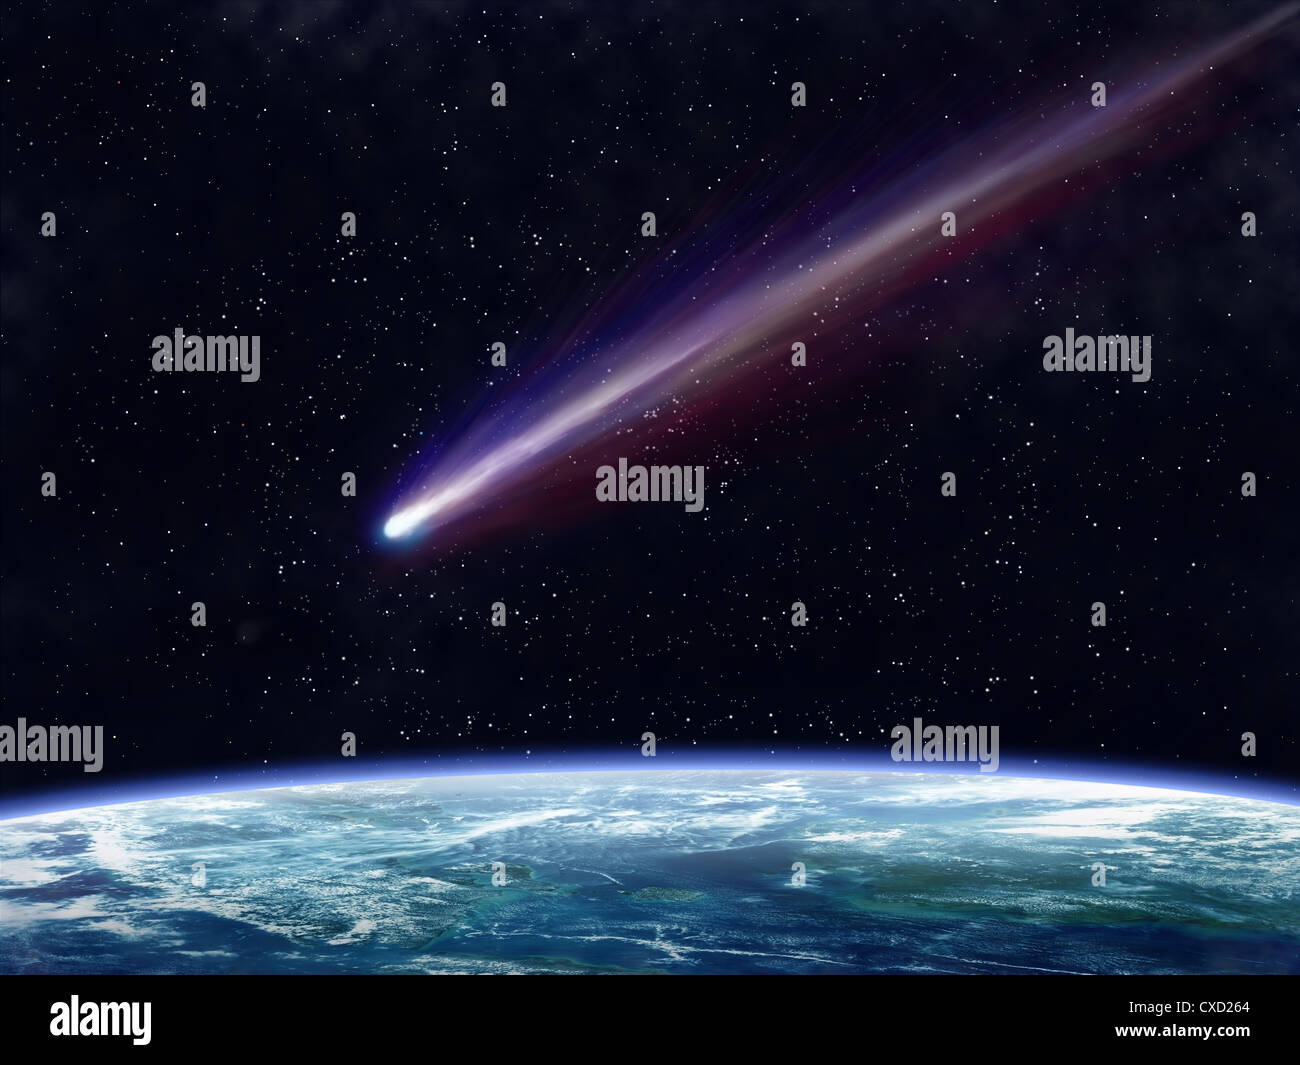 Illustration of a comet flying through space close to the earth Stock Photo